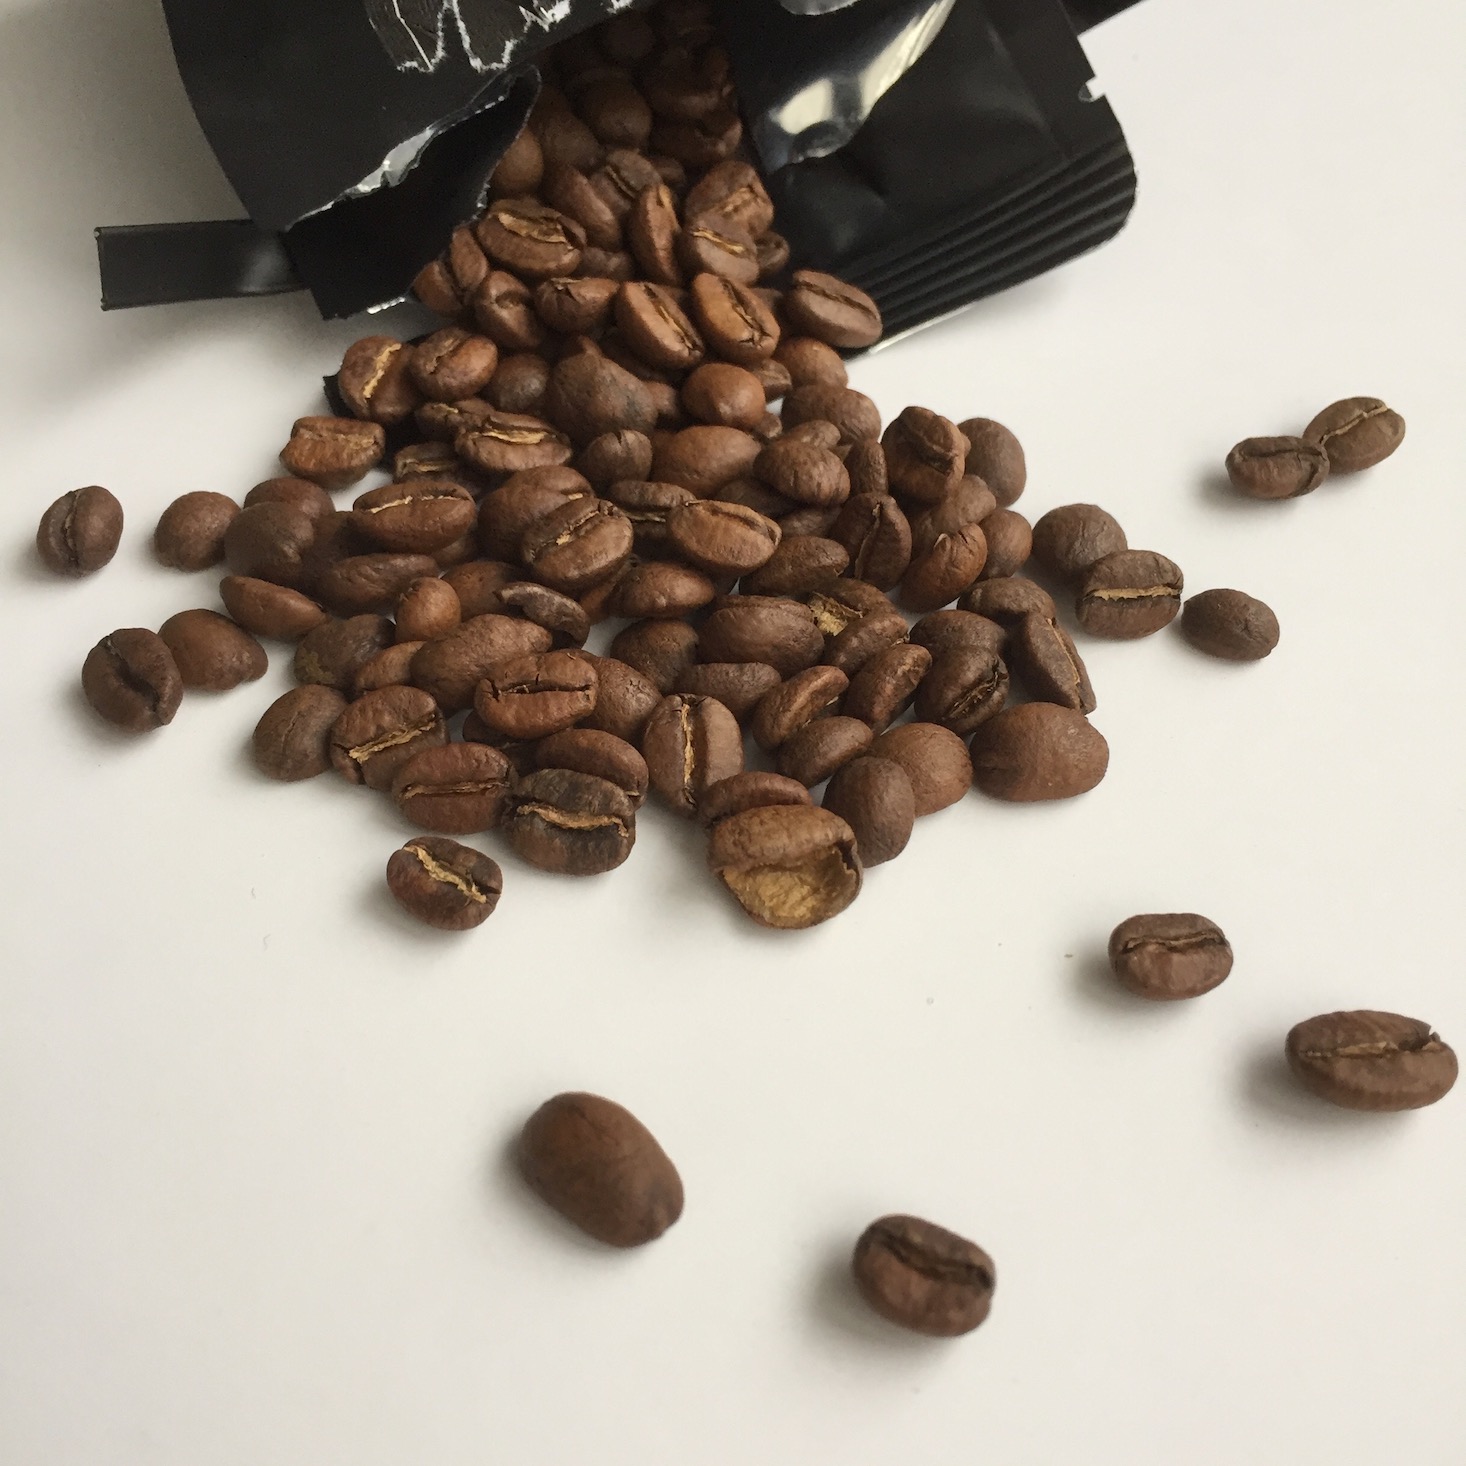 angels-cup-december-2016-colombia-beans